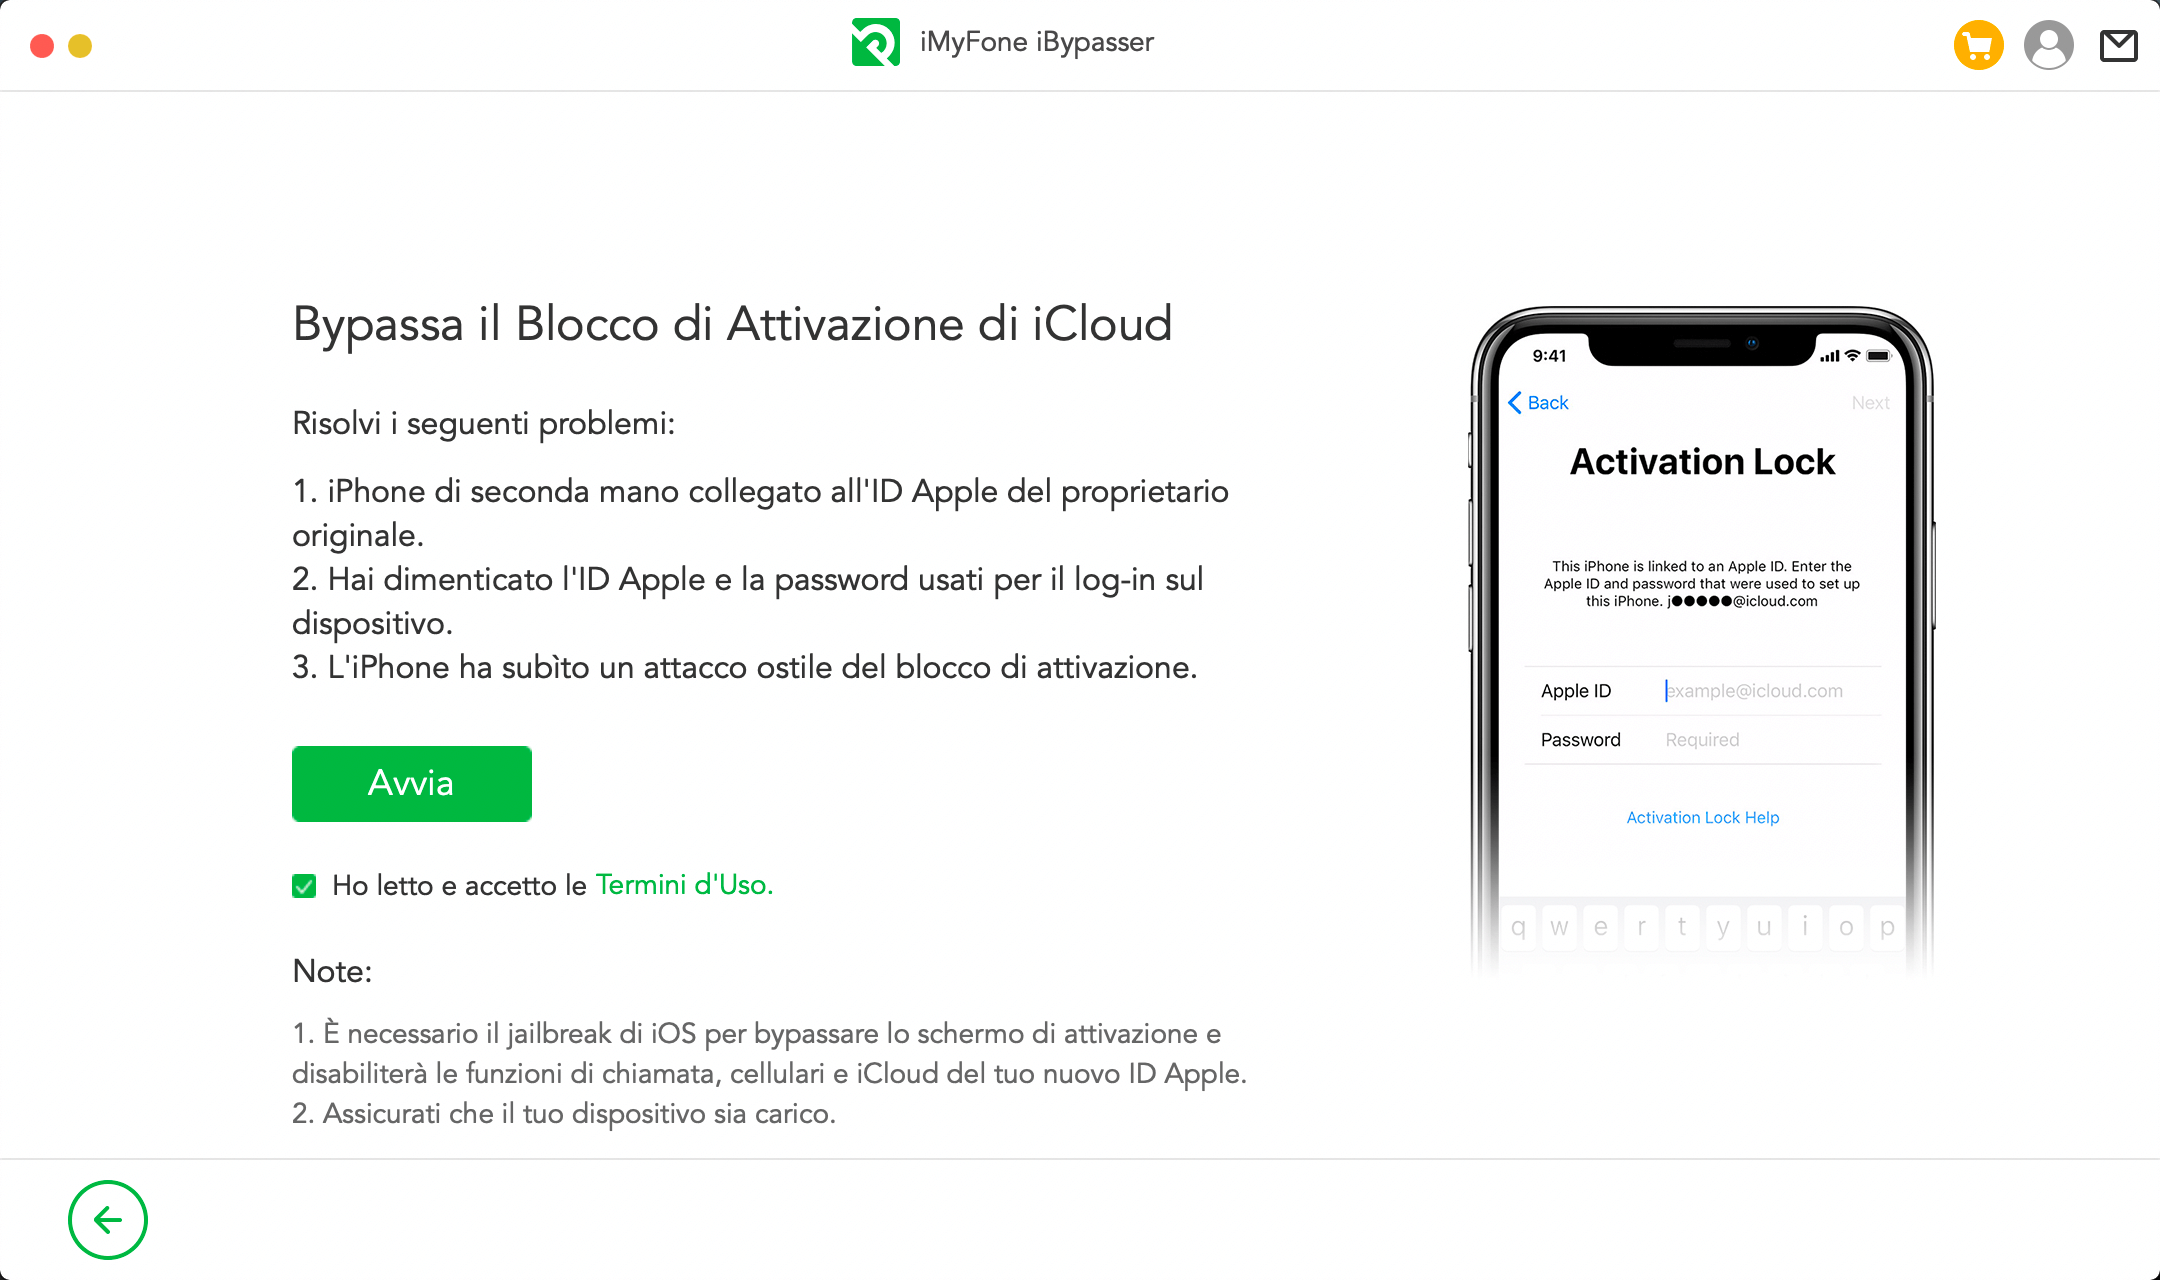 sbloccare iCloud iPhone con iBypasser